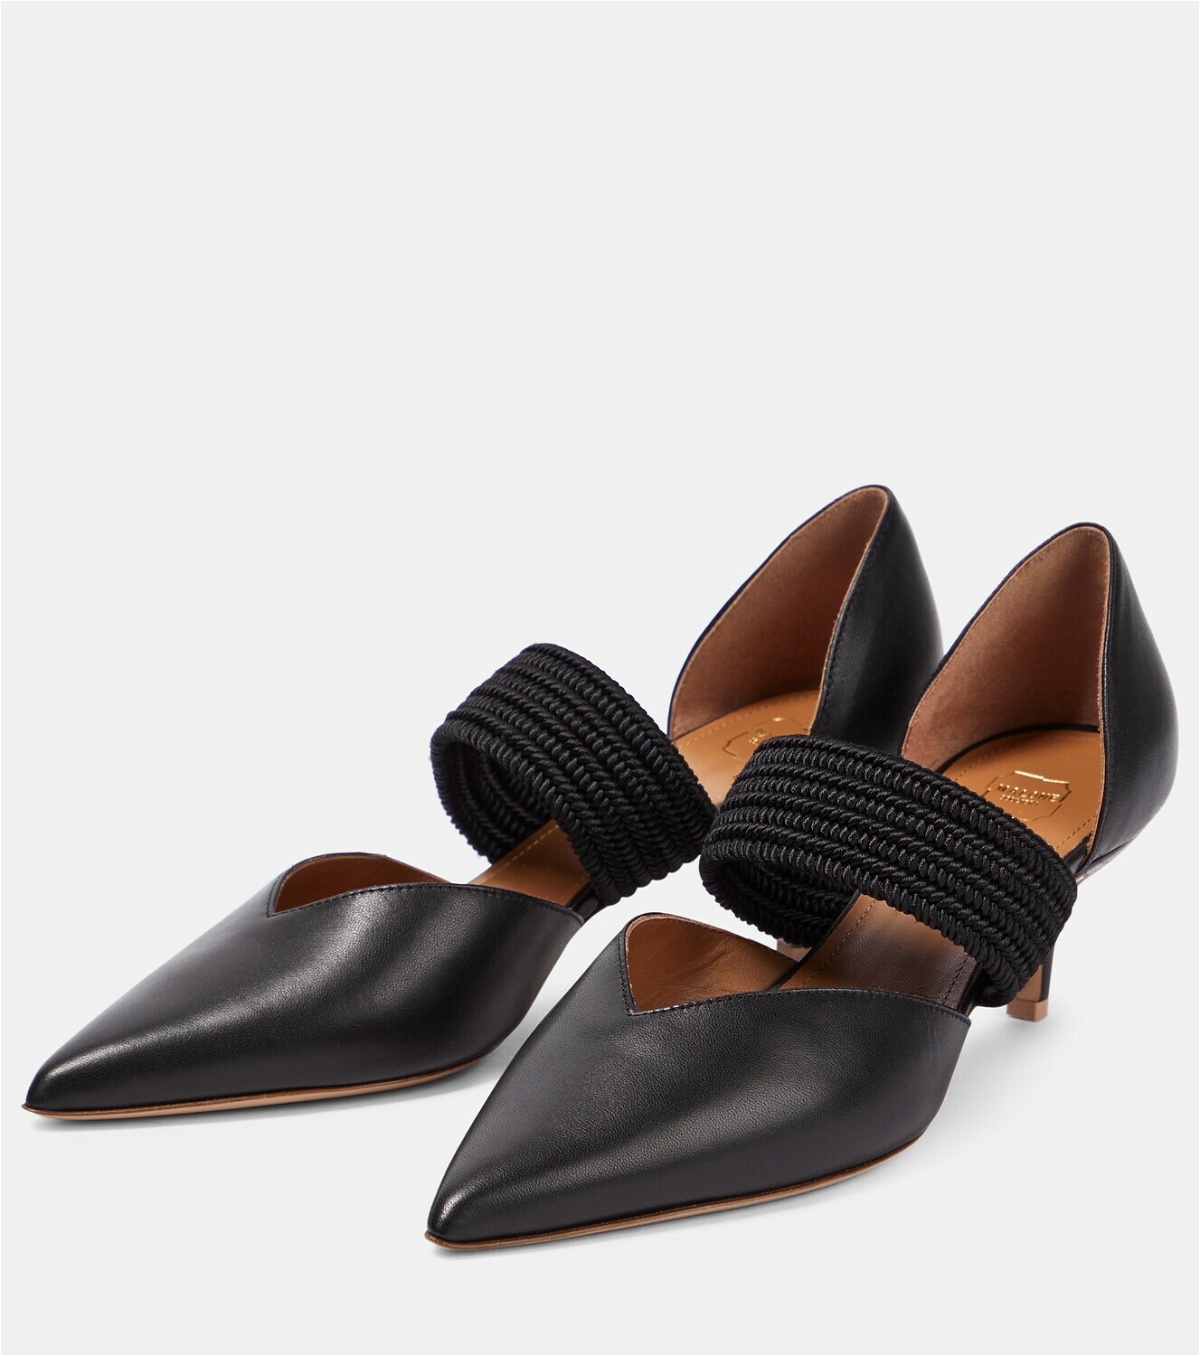 Malone Souliers Maisie 45 leather mules Malone Souliers